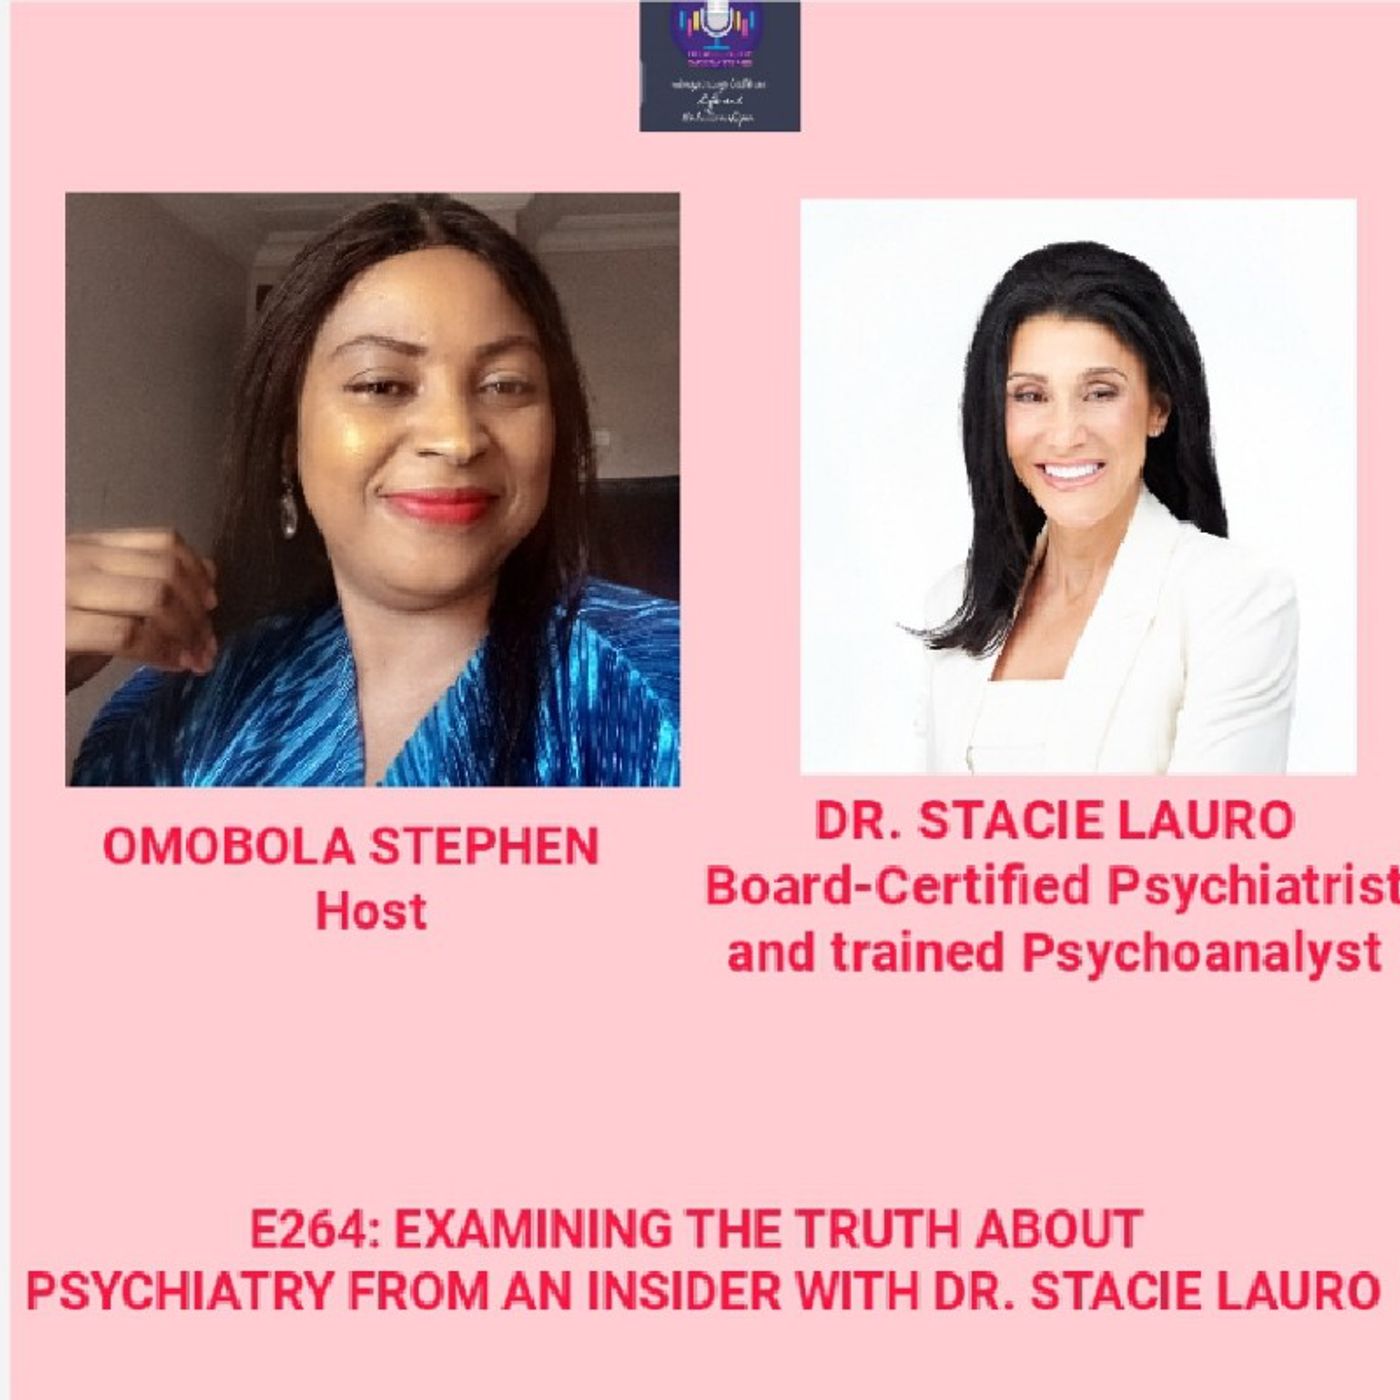 E264: Examining The Truth About Psychiatry From An Insider With Dr.Stacie Lauro